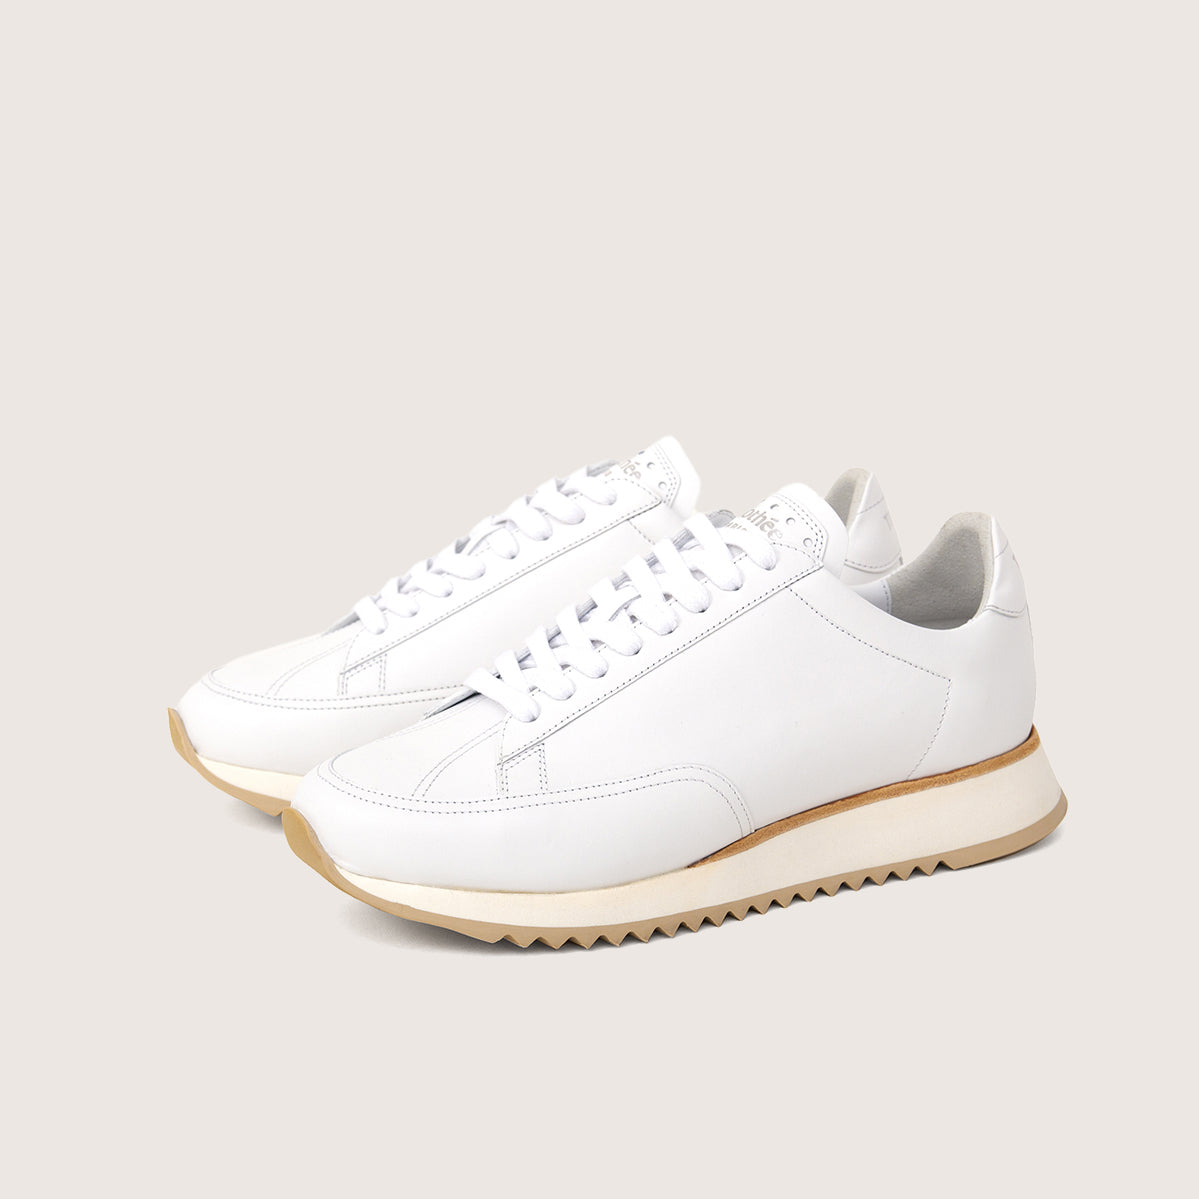 French-sneaker-cabourg-nappa-white-women-quarter-view-by-timothee-paris